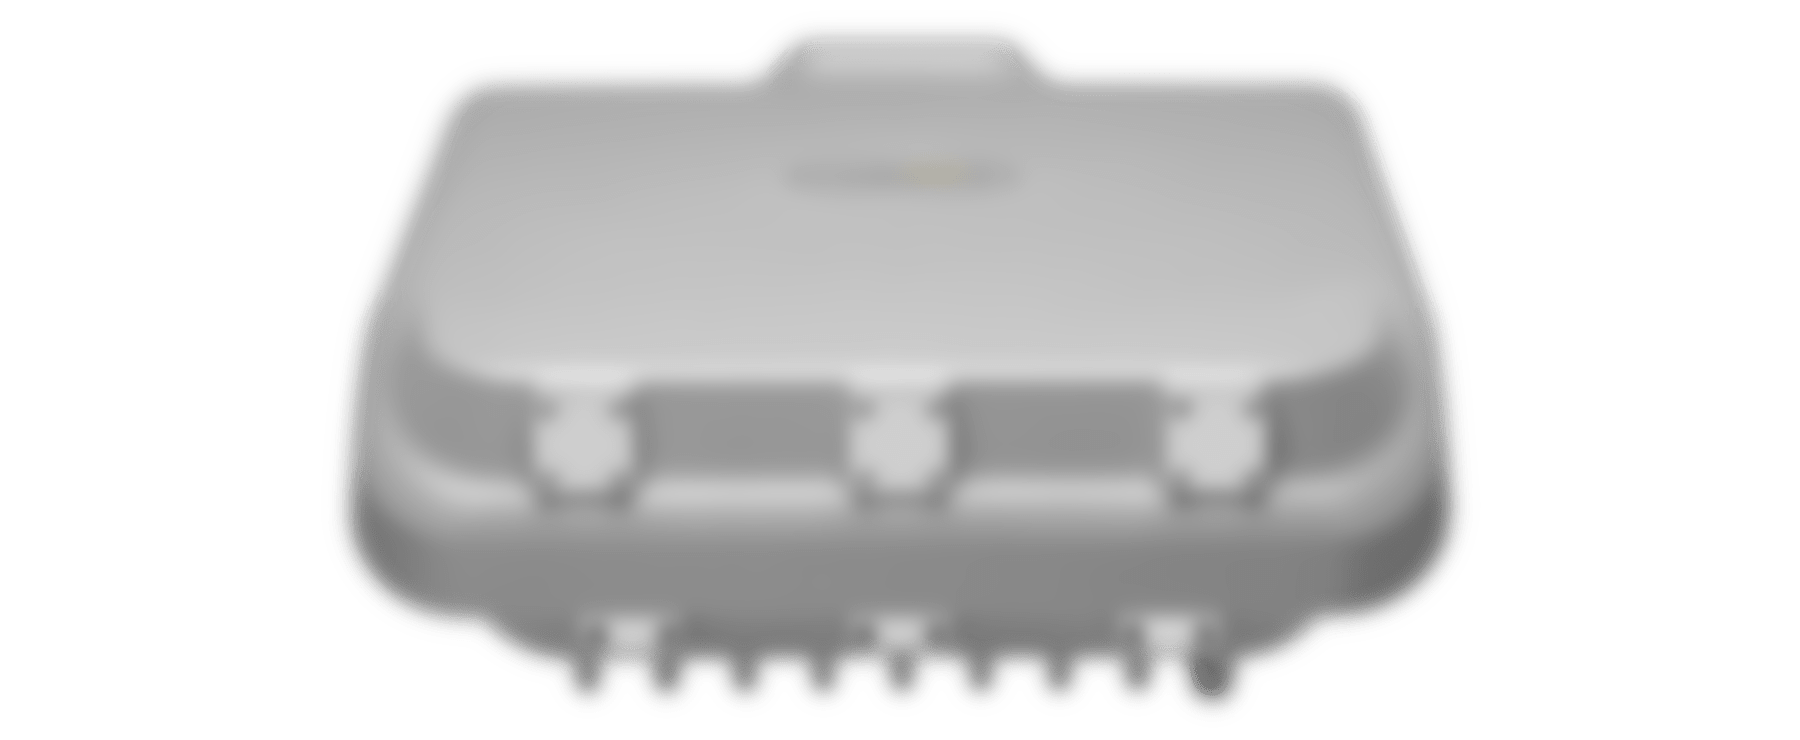 A2405 Series Outdoor Cellular Access Point